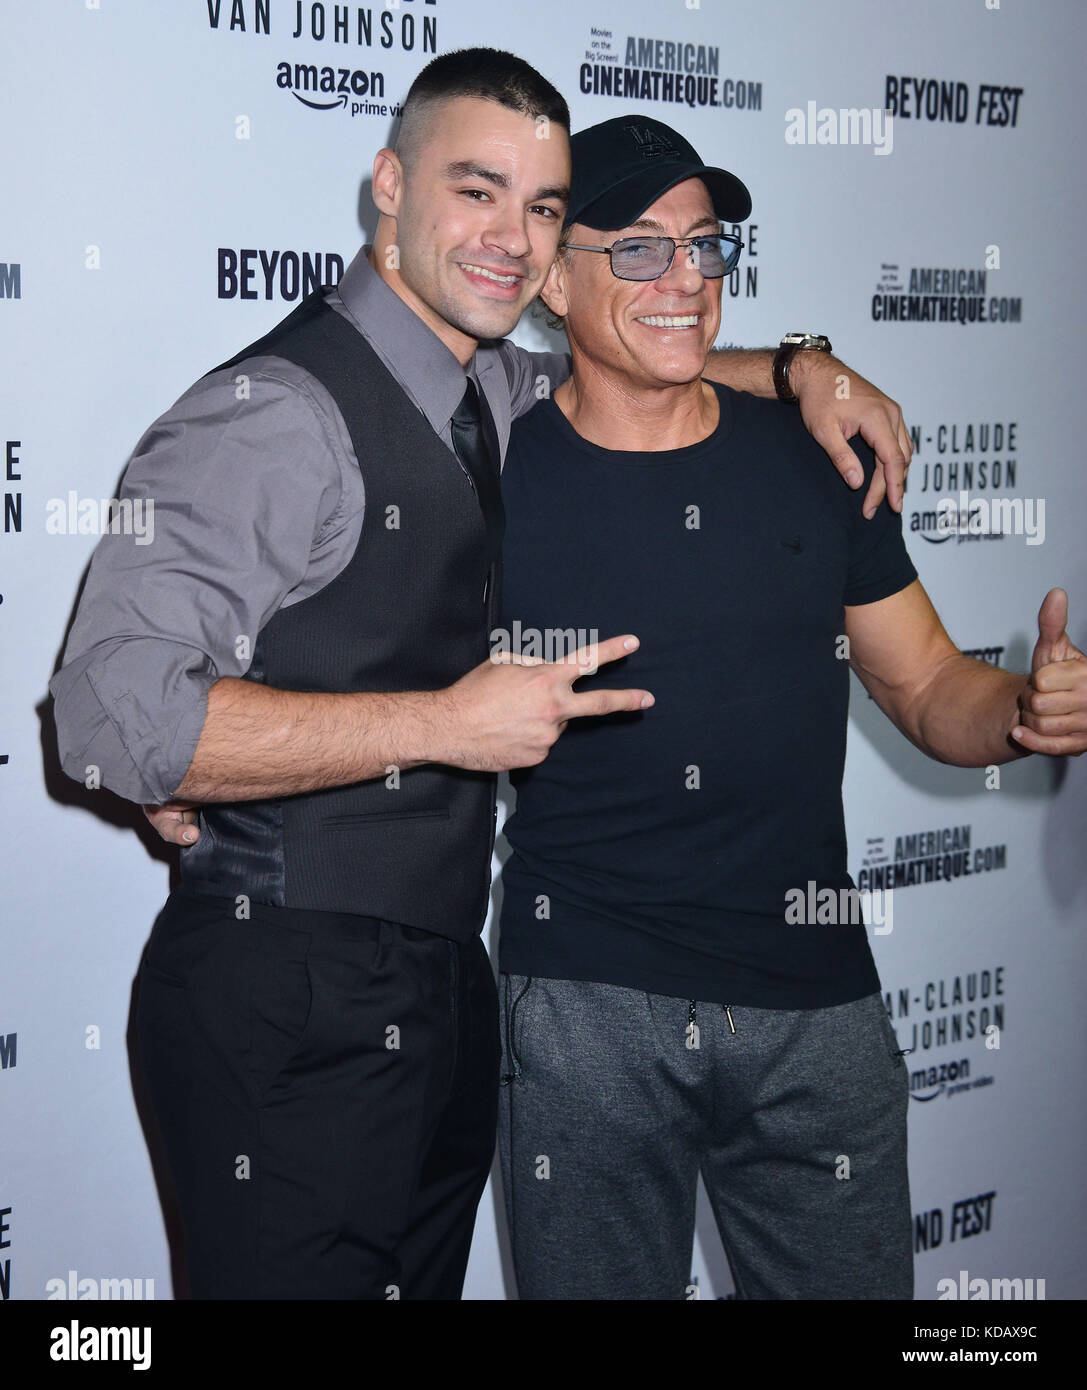 Jean Claude Van Damme, son Chris 028 arriving at the Jean Claude Van  Johnson, An Amazon Movie Premiere at the Egyptian Theatre in Los Angeles.  October 9, 2017 Stock Photo - Alamy